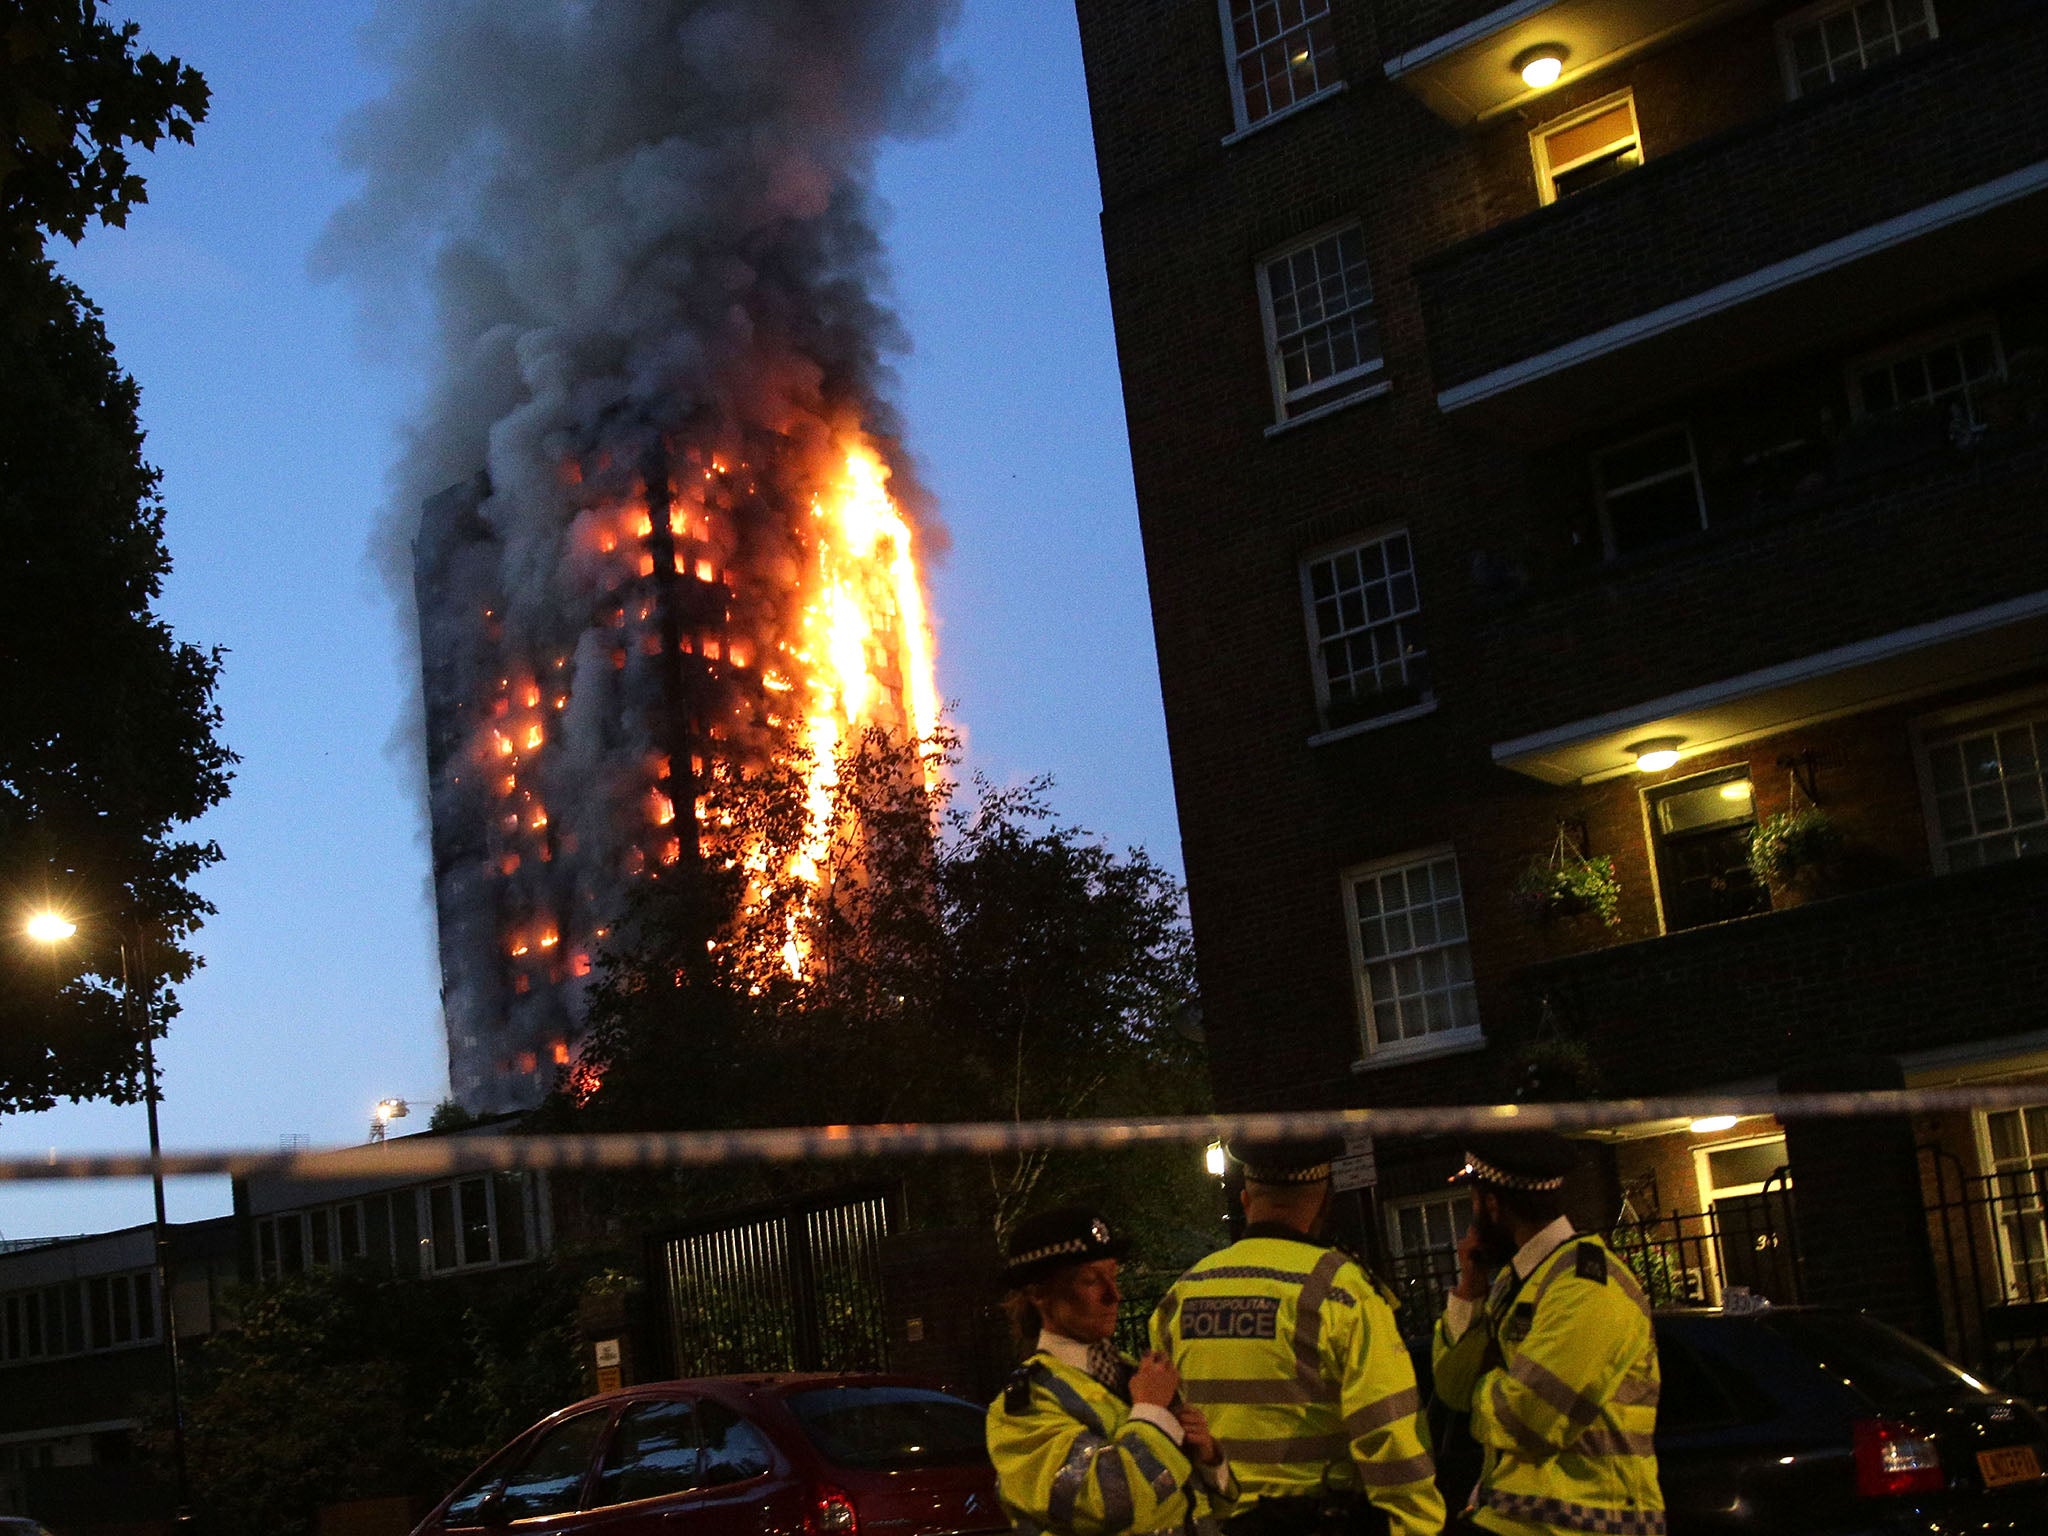 Councils across the country have launched emergency reviews of their towers in the aftermath of the North London tragedy